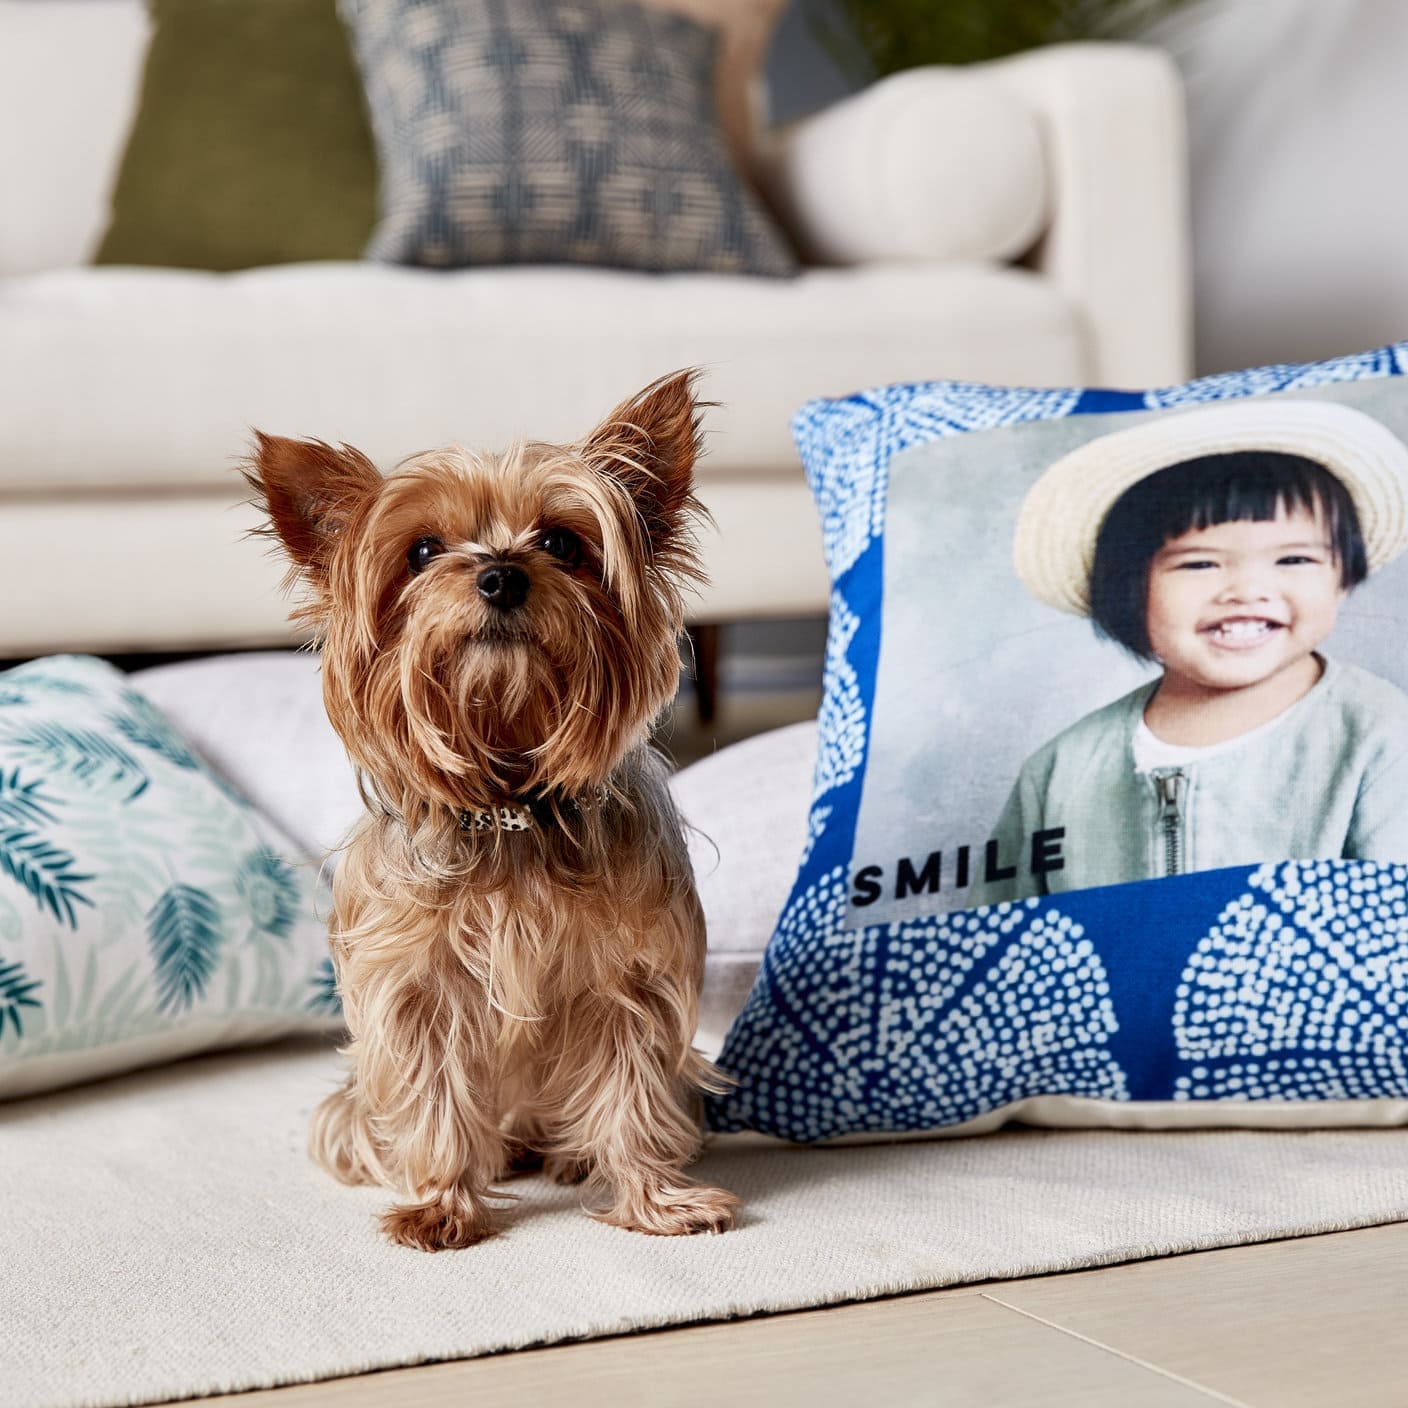 dog next to personalized pillow